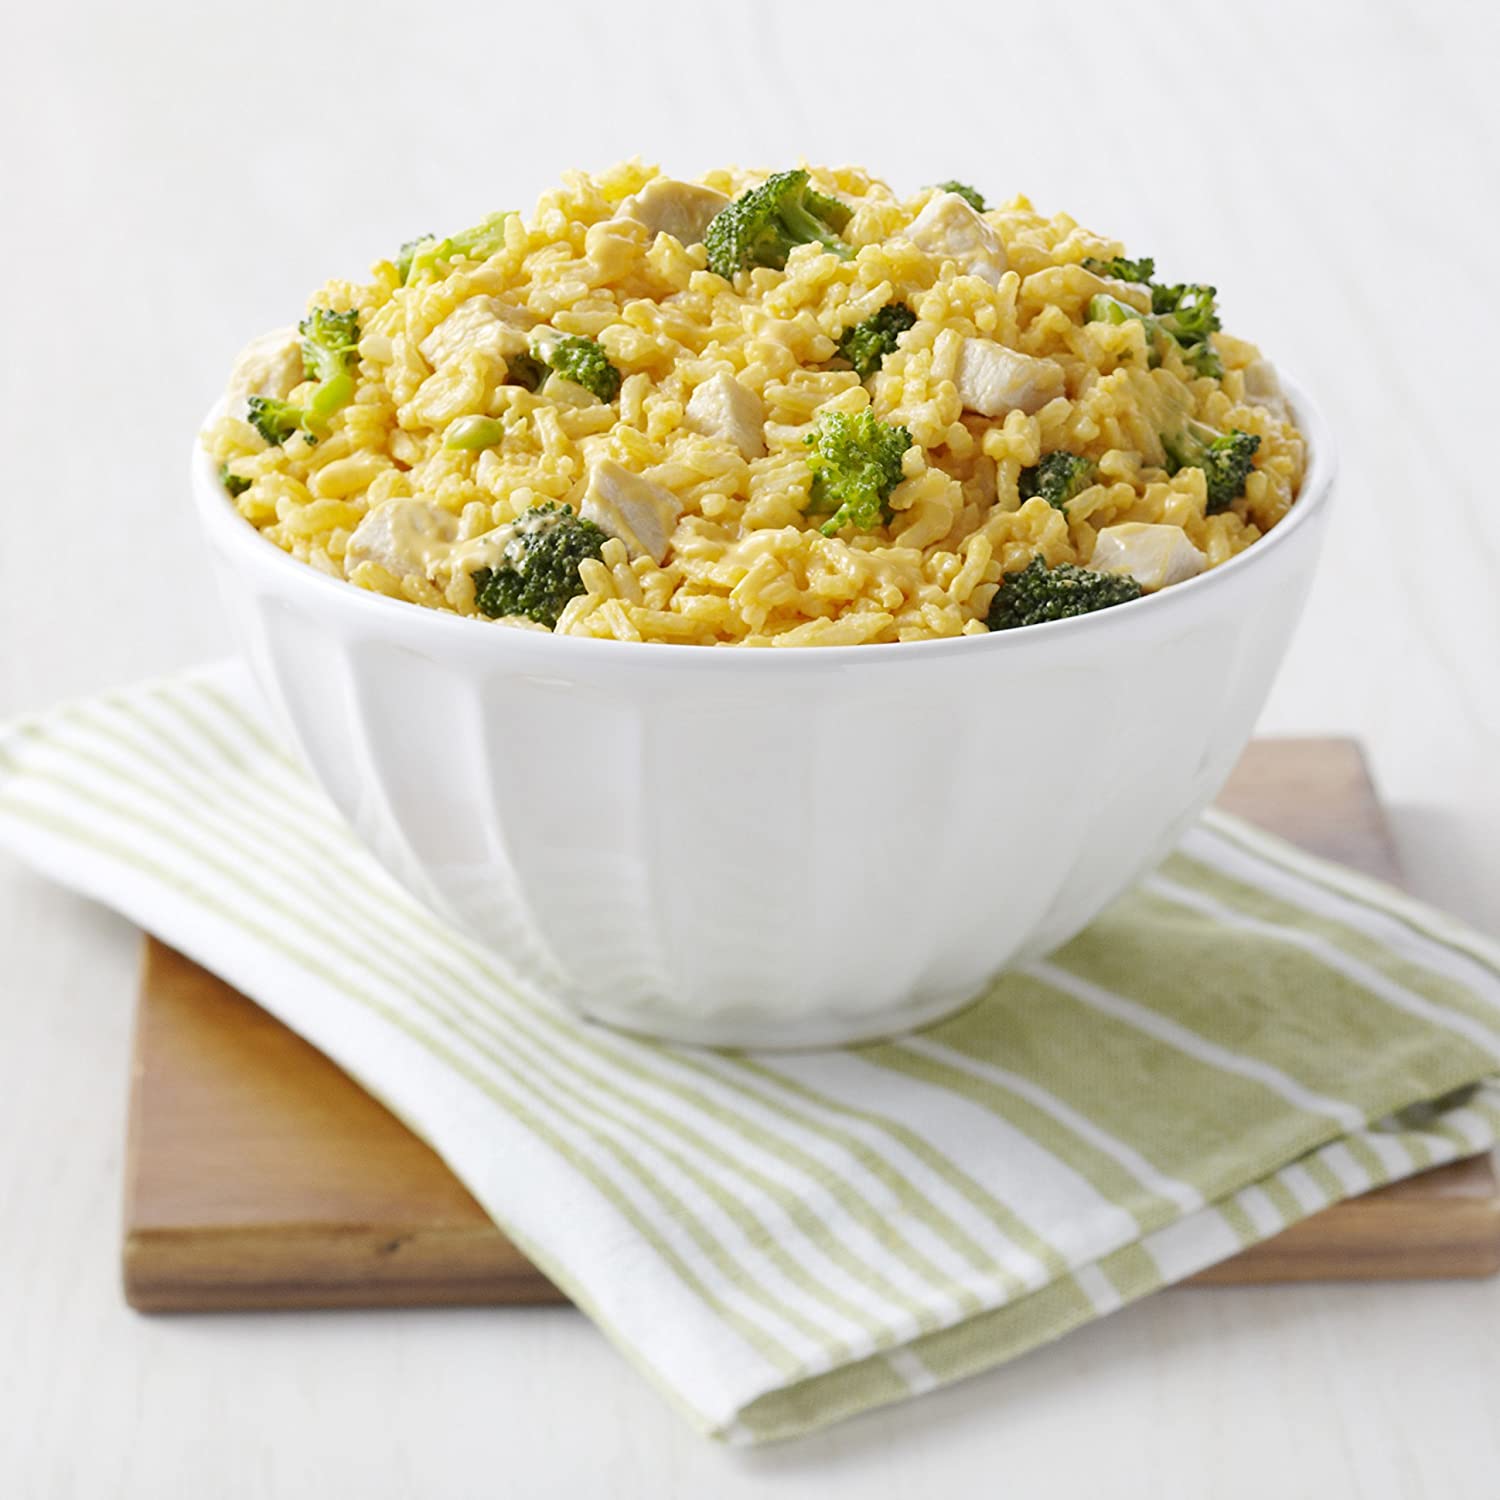 A bowl of rice with broccoli and chicken from an emergency food storage kit.